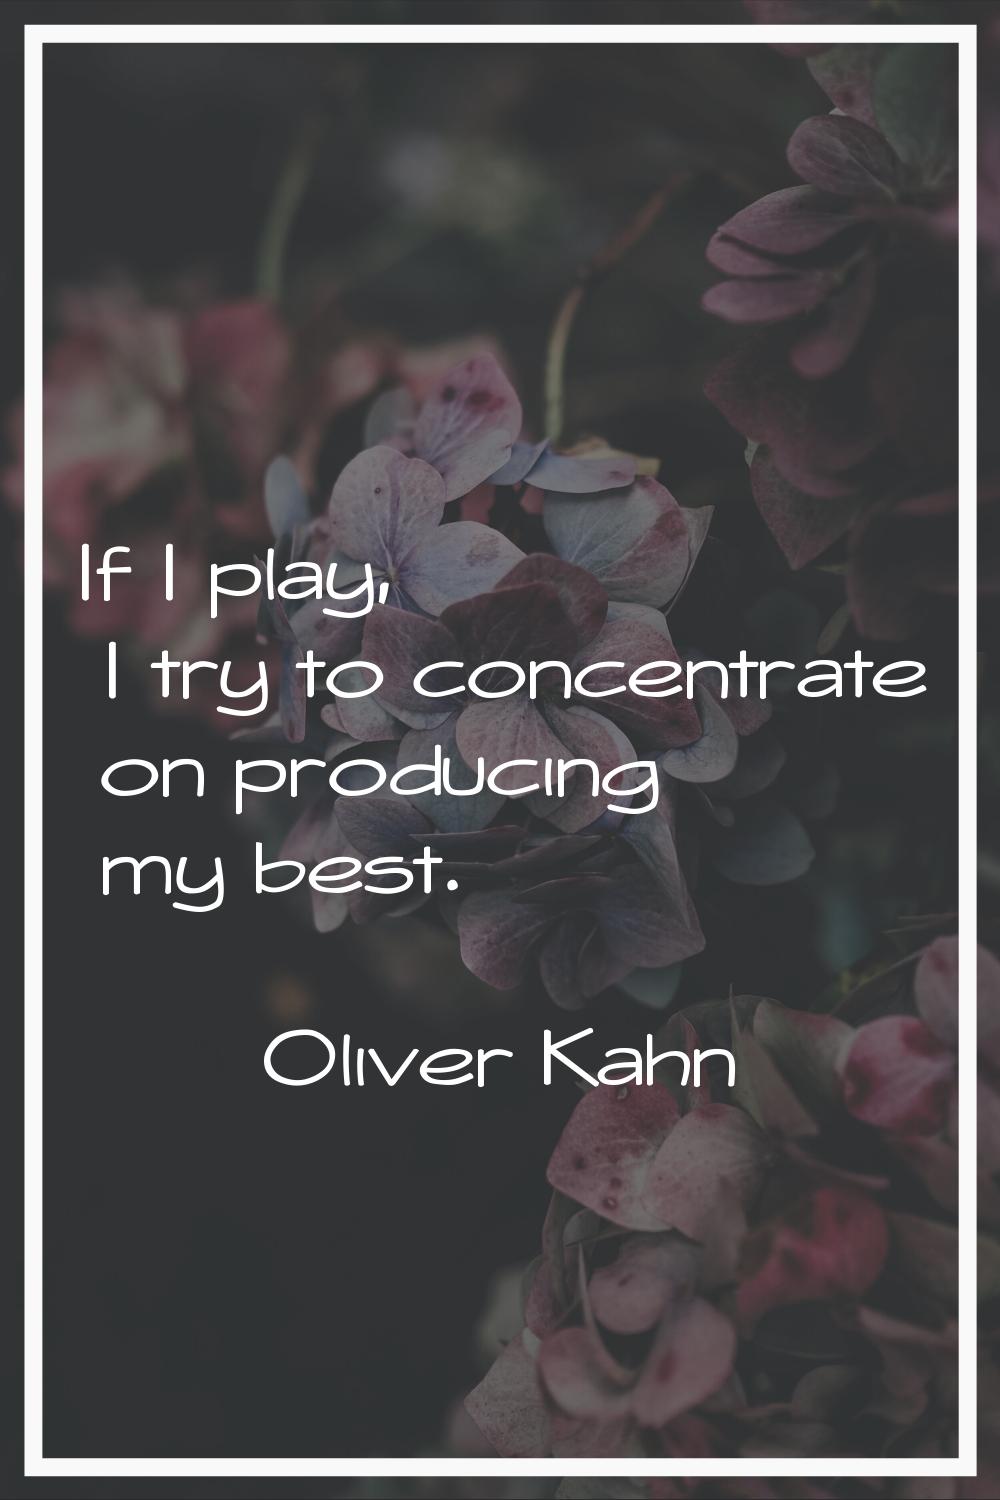 If I play, I try to concentrate on producing my best.